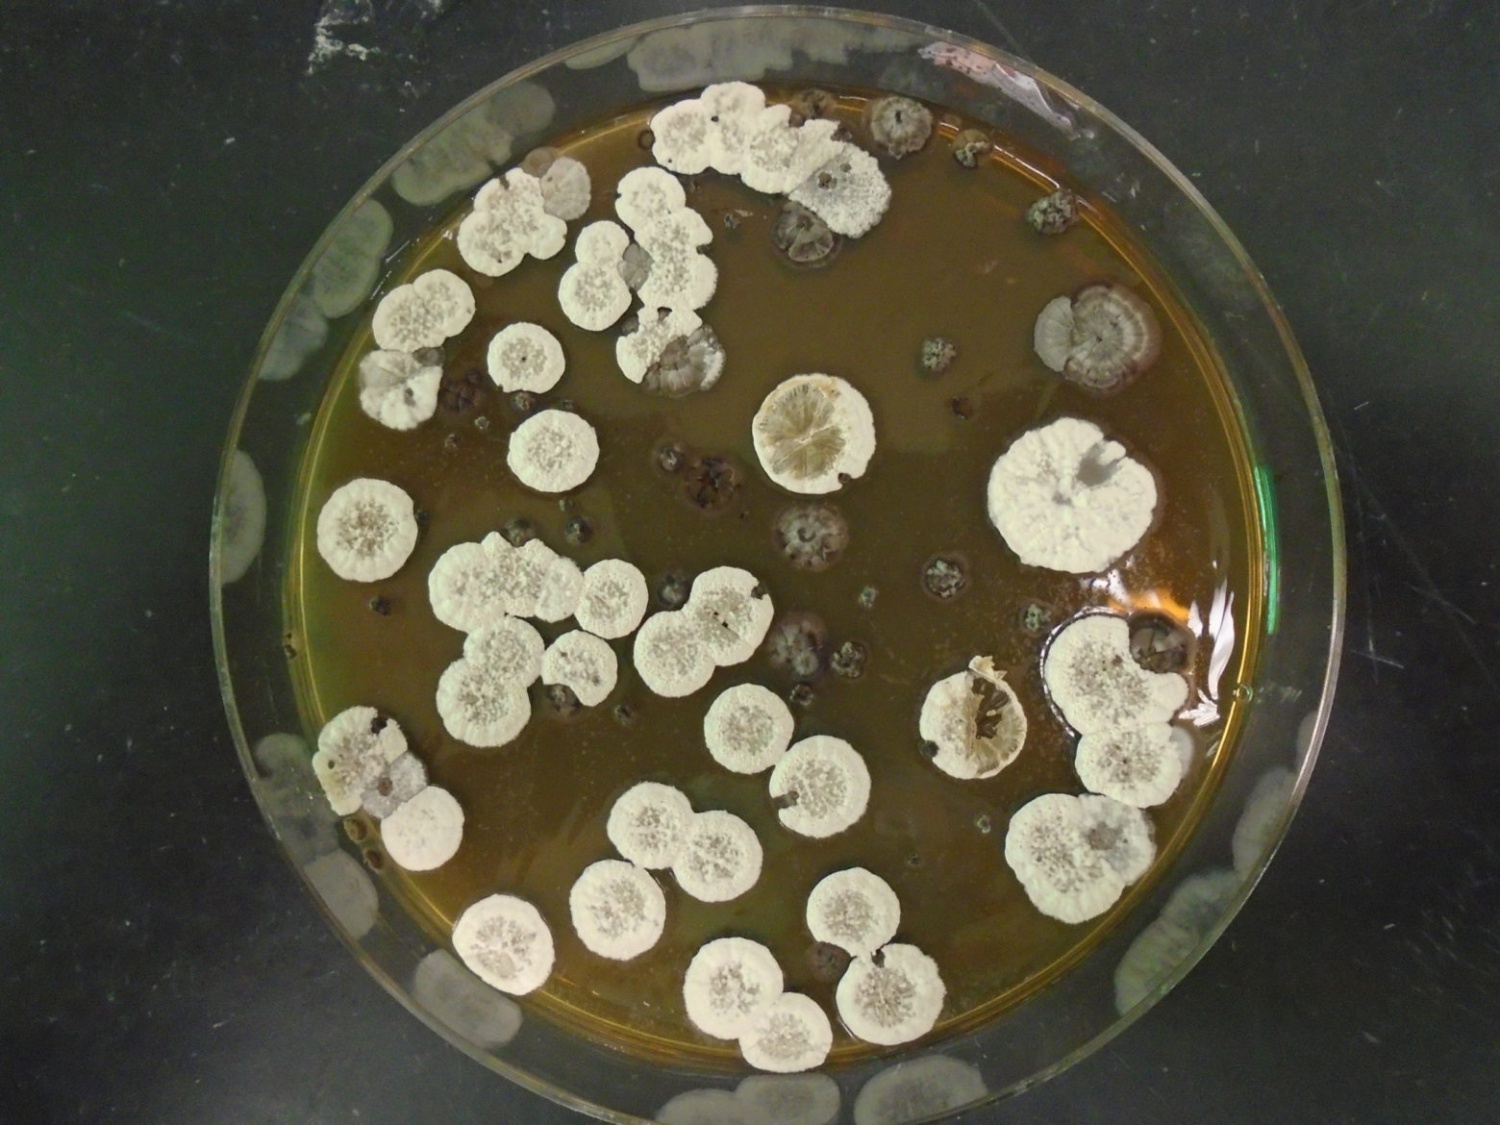 Biofuel from Bacteria